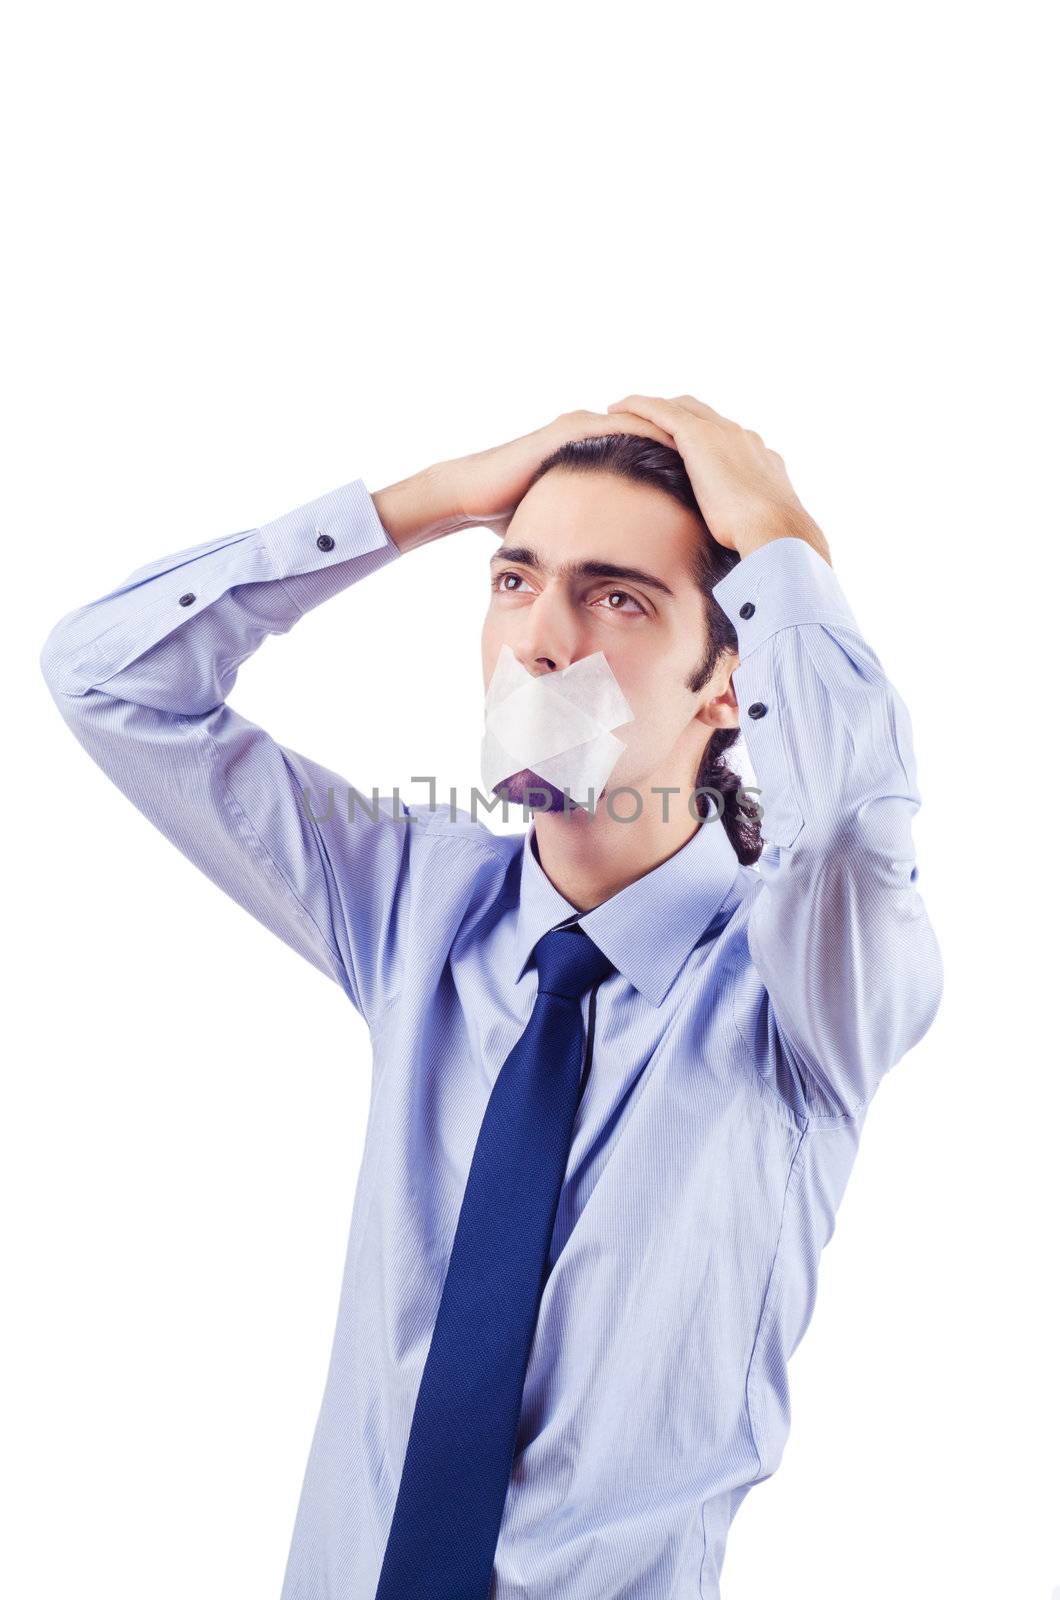 Man with closed lips in censorship concept